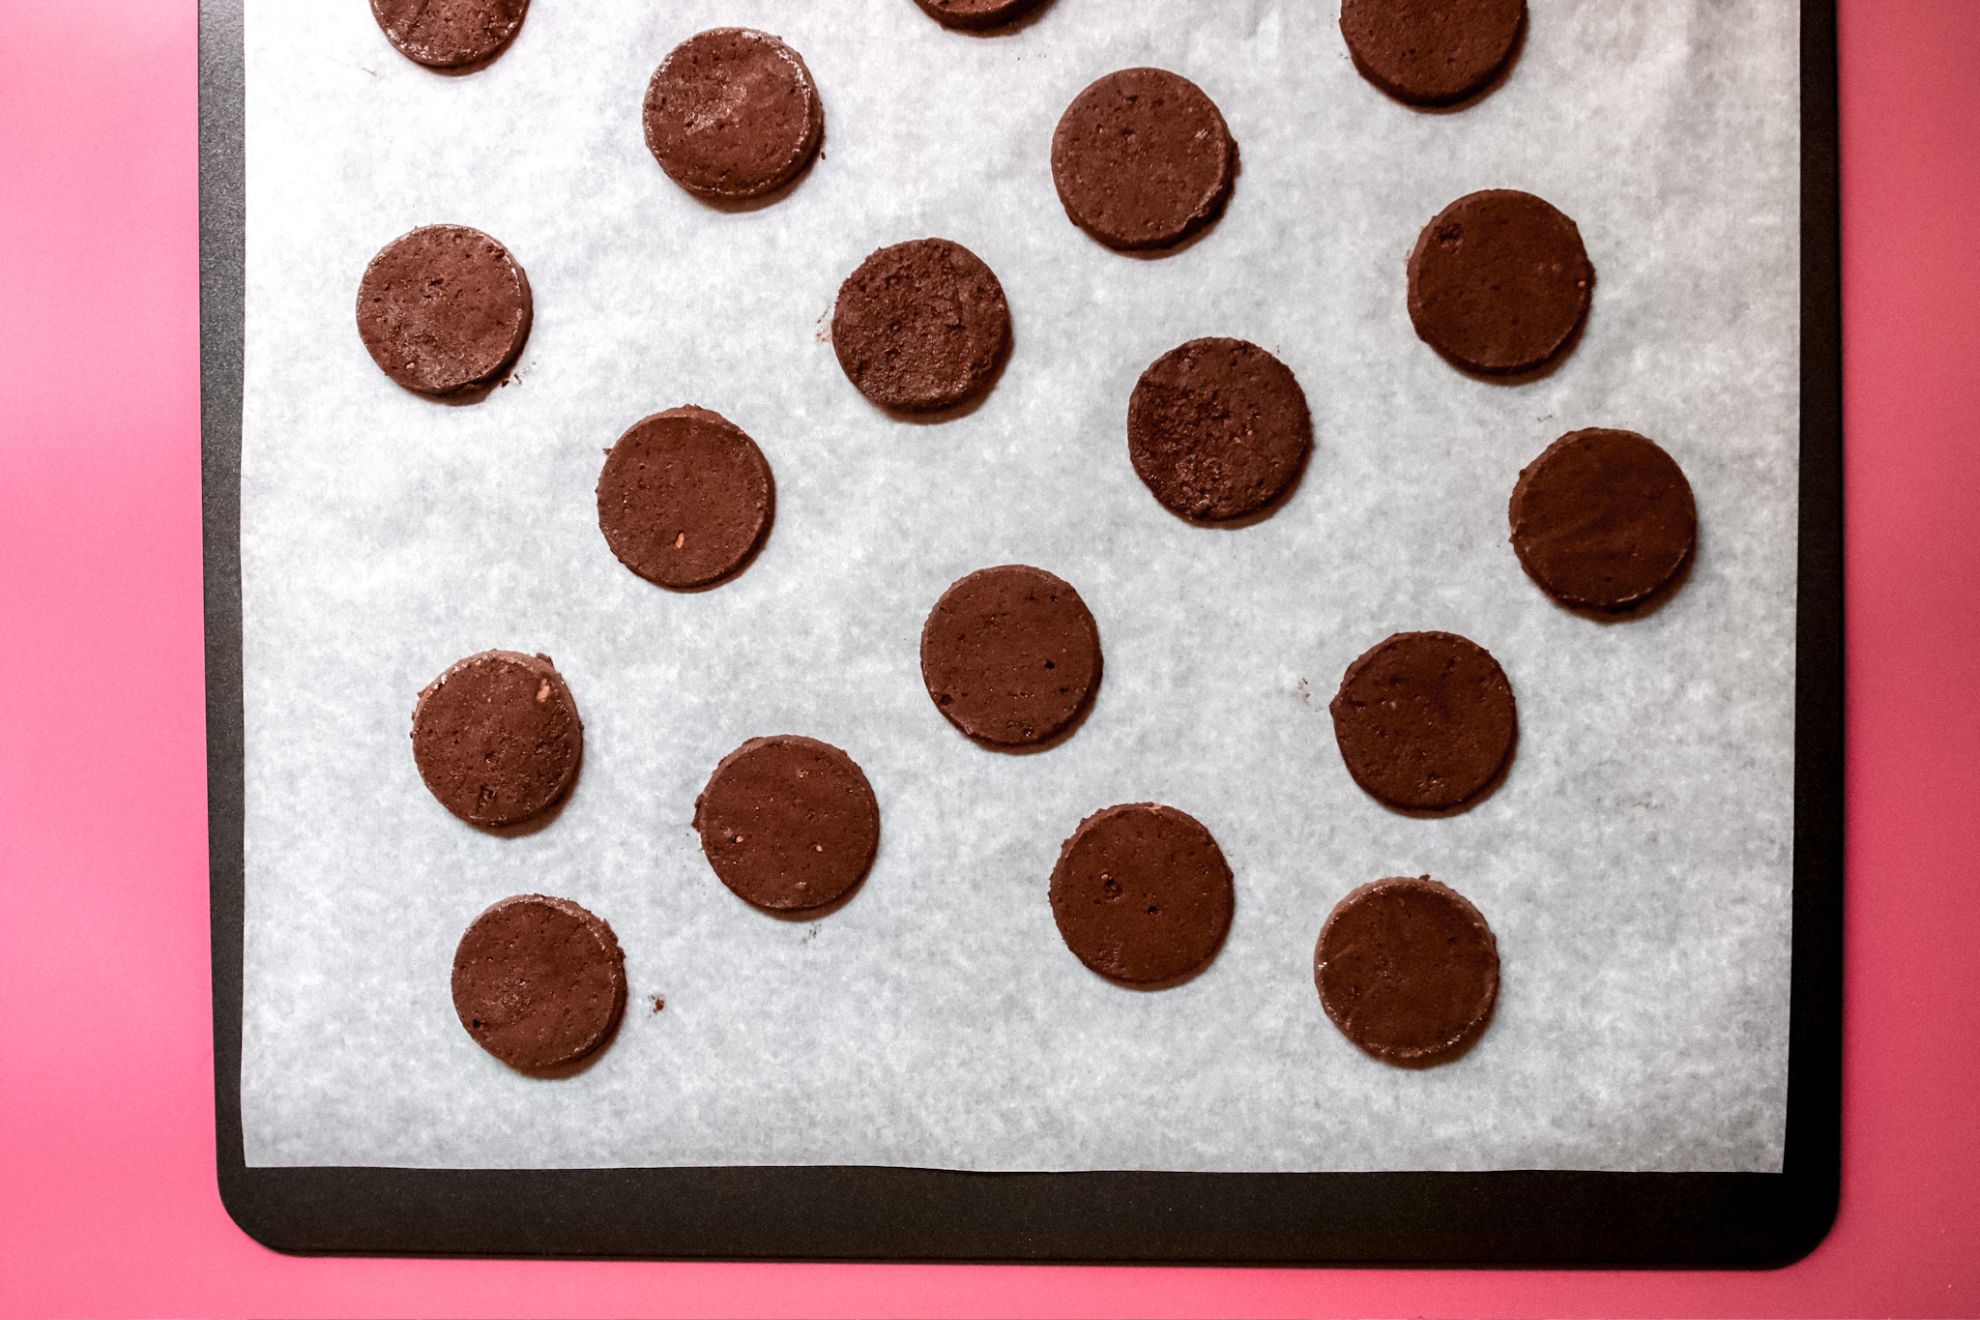 This is an overhead horizontal image of a baking sheet lined with white parchment paper. On the parchment paper are raw flat, chocolate circle cookies. The baking sheet sits on a dark pink surface.